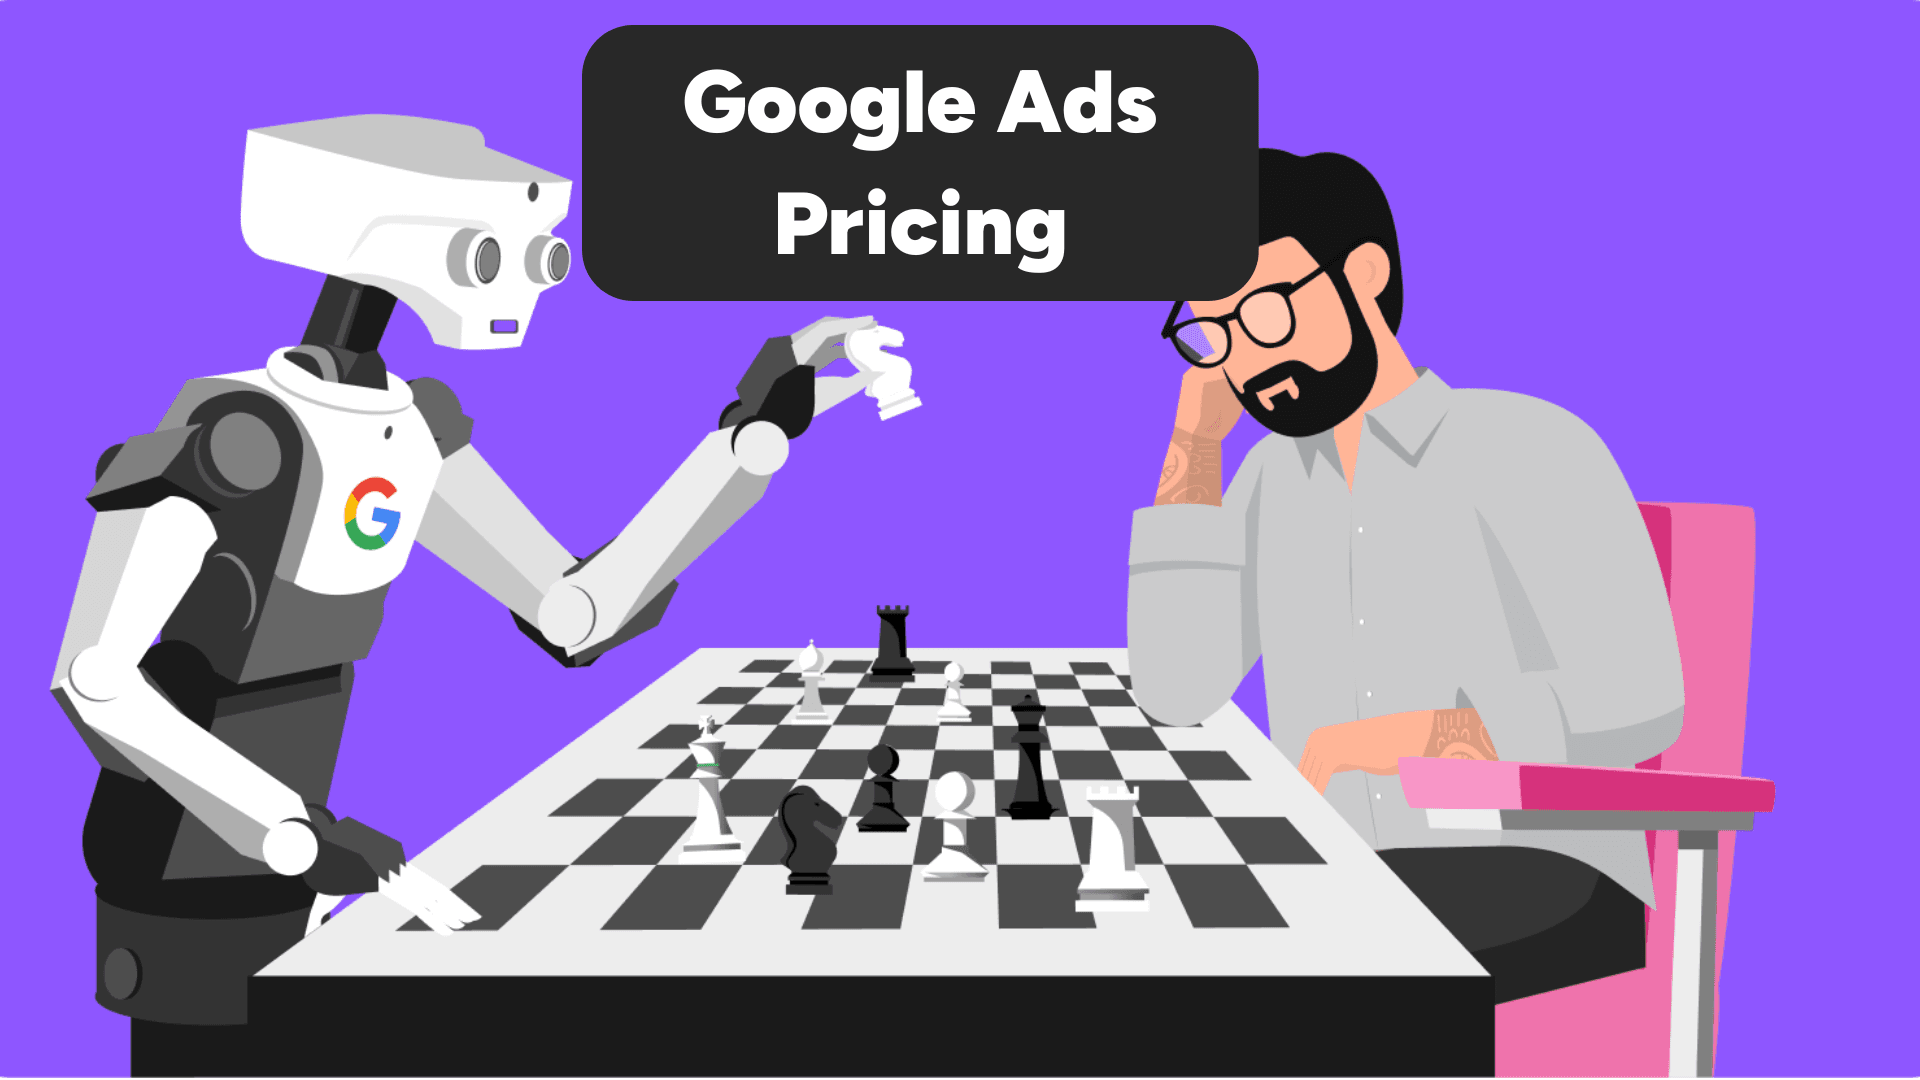 Google ads pricing graphic